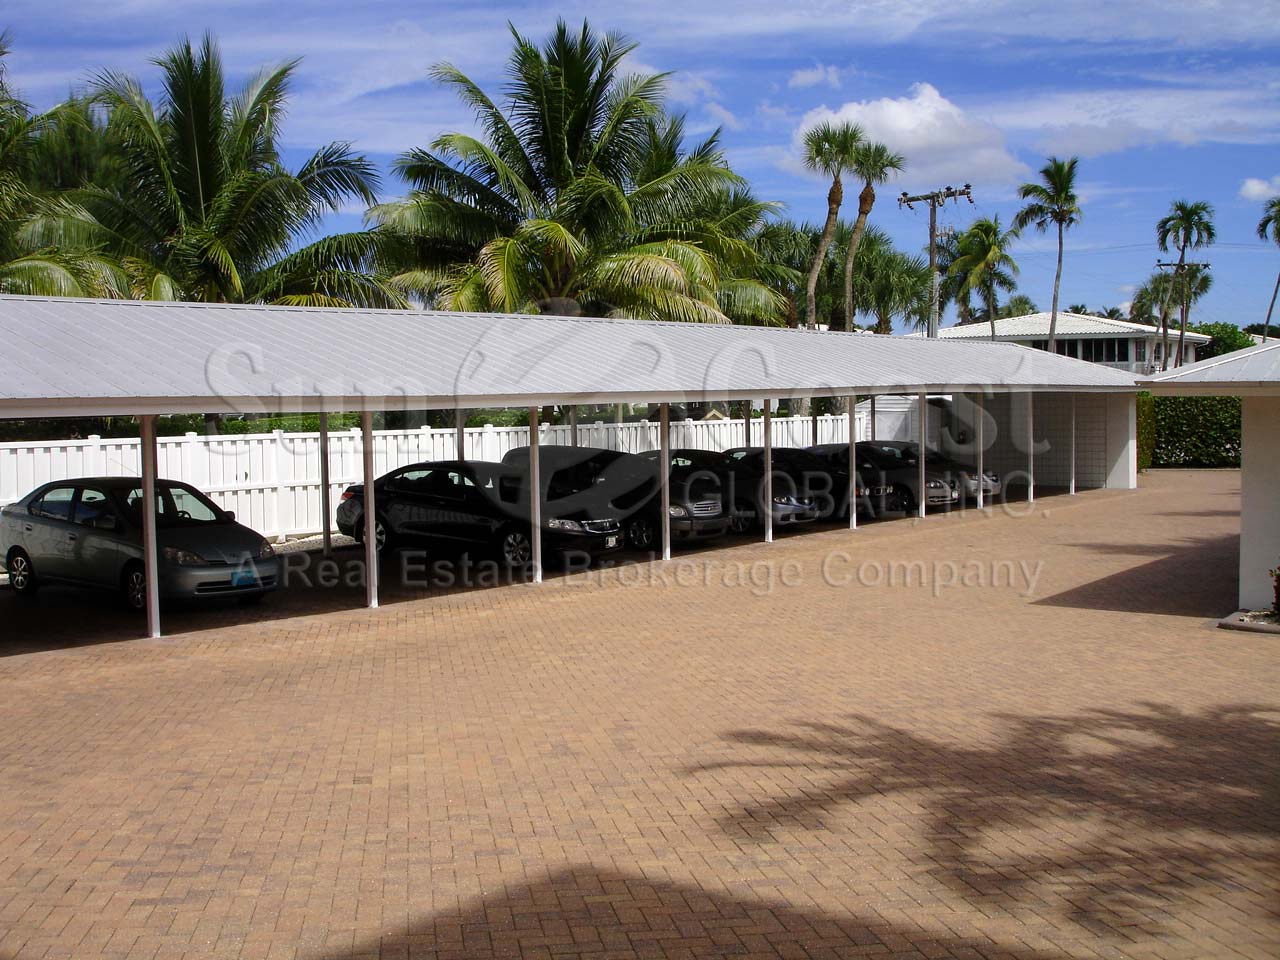 Carriage Club Covered Parking